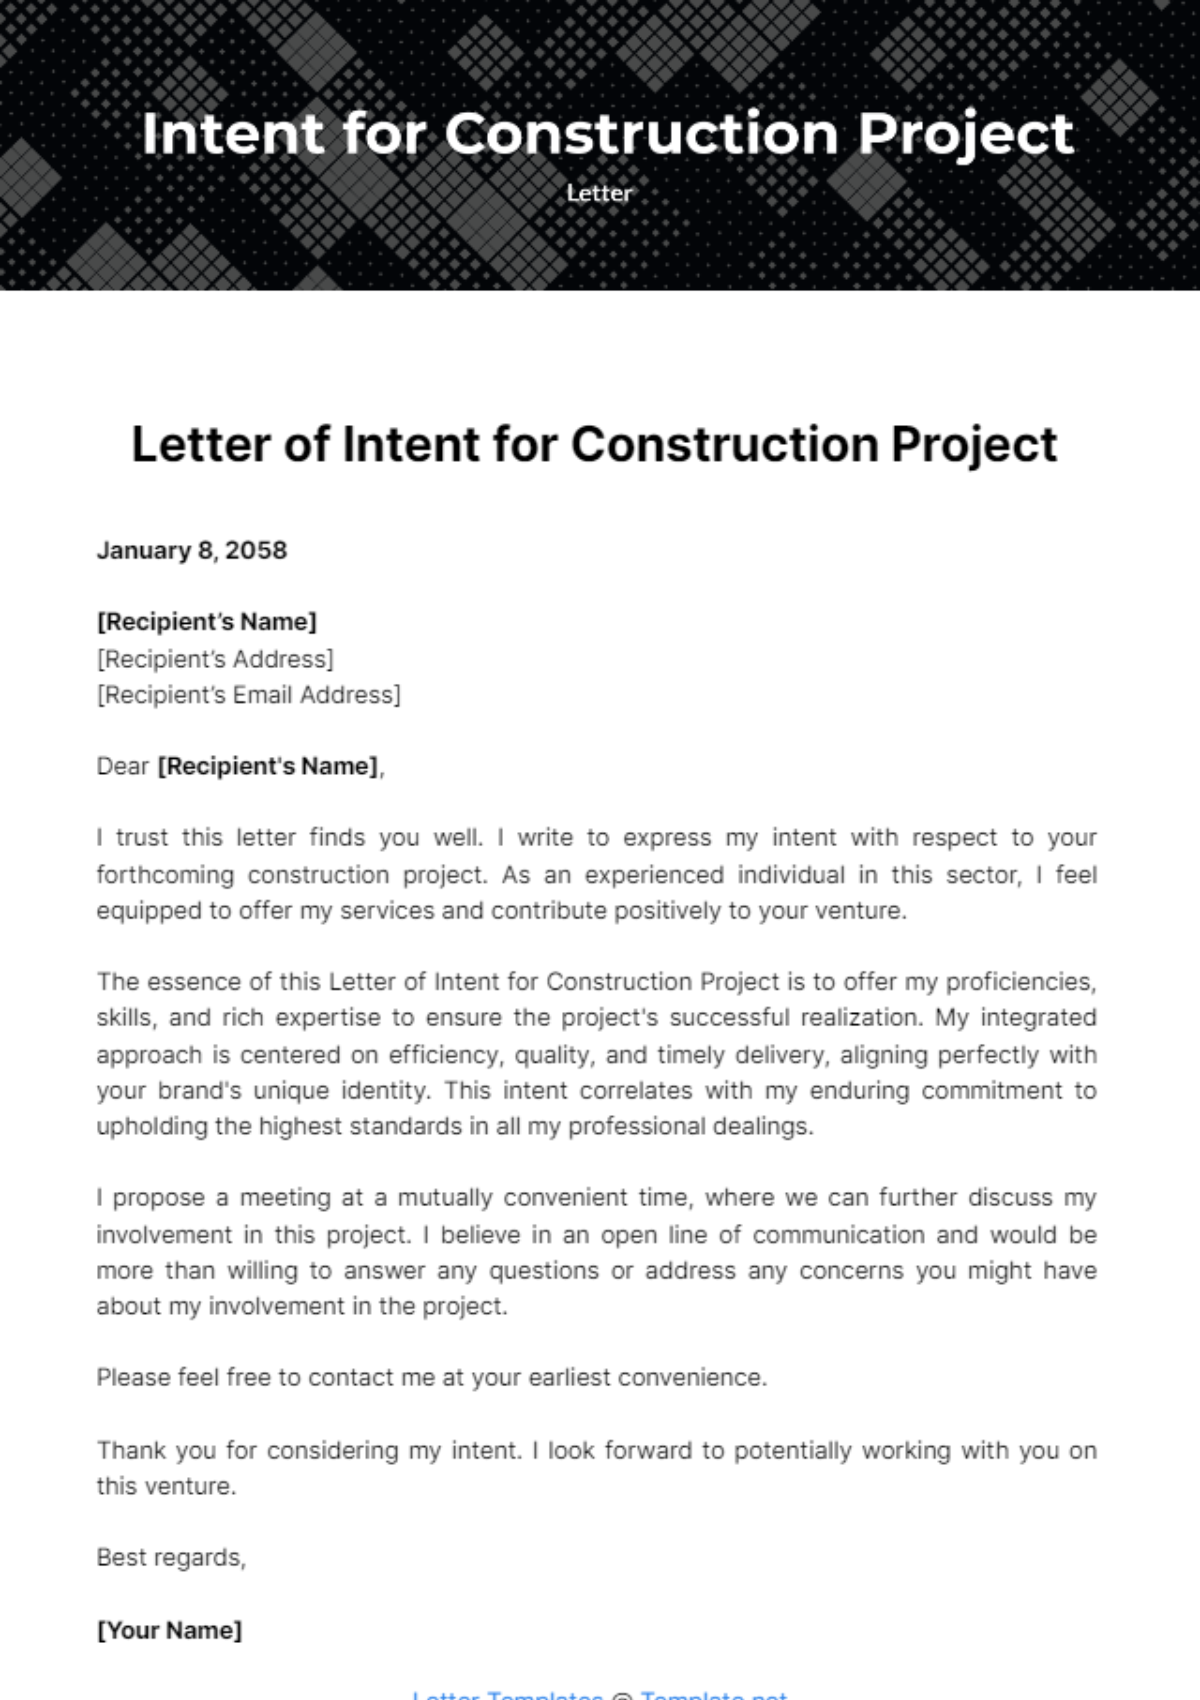 Free Letter of Intent for Construction Project Template